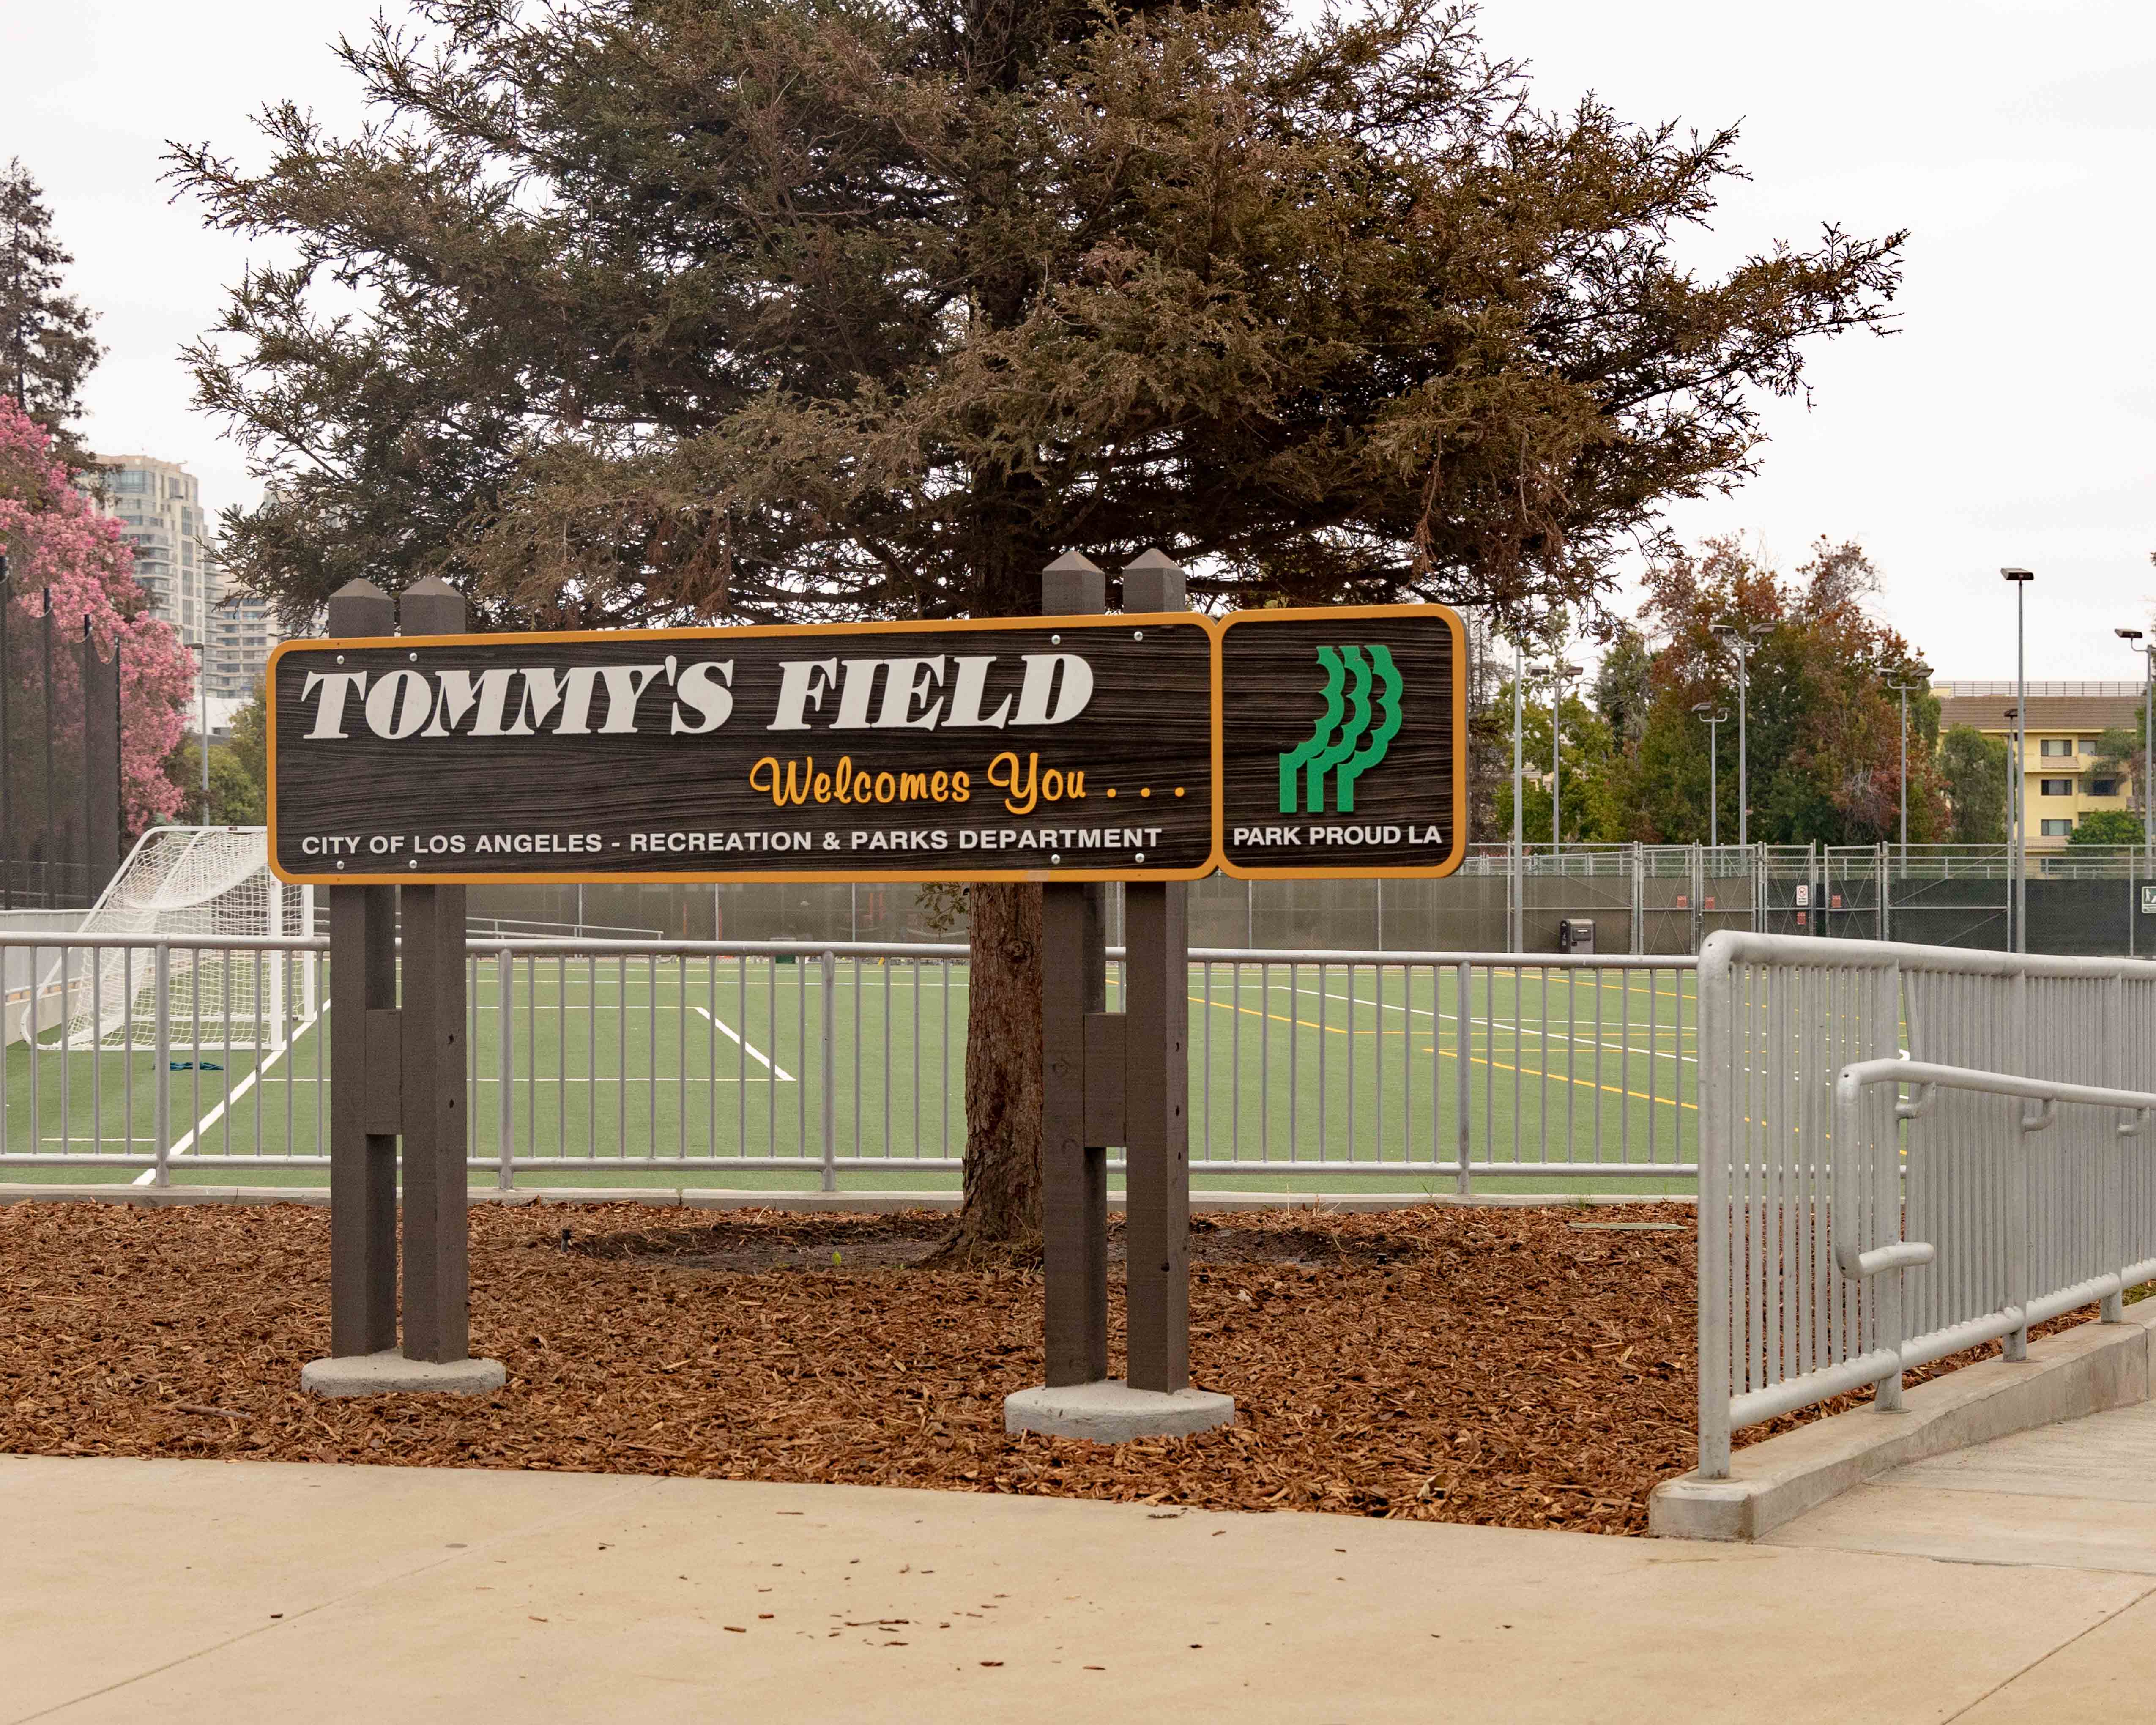 Tommys Field park sign